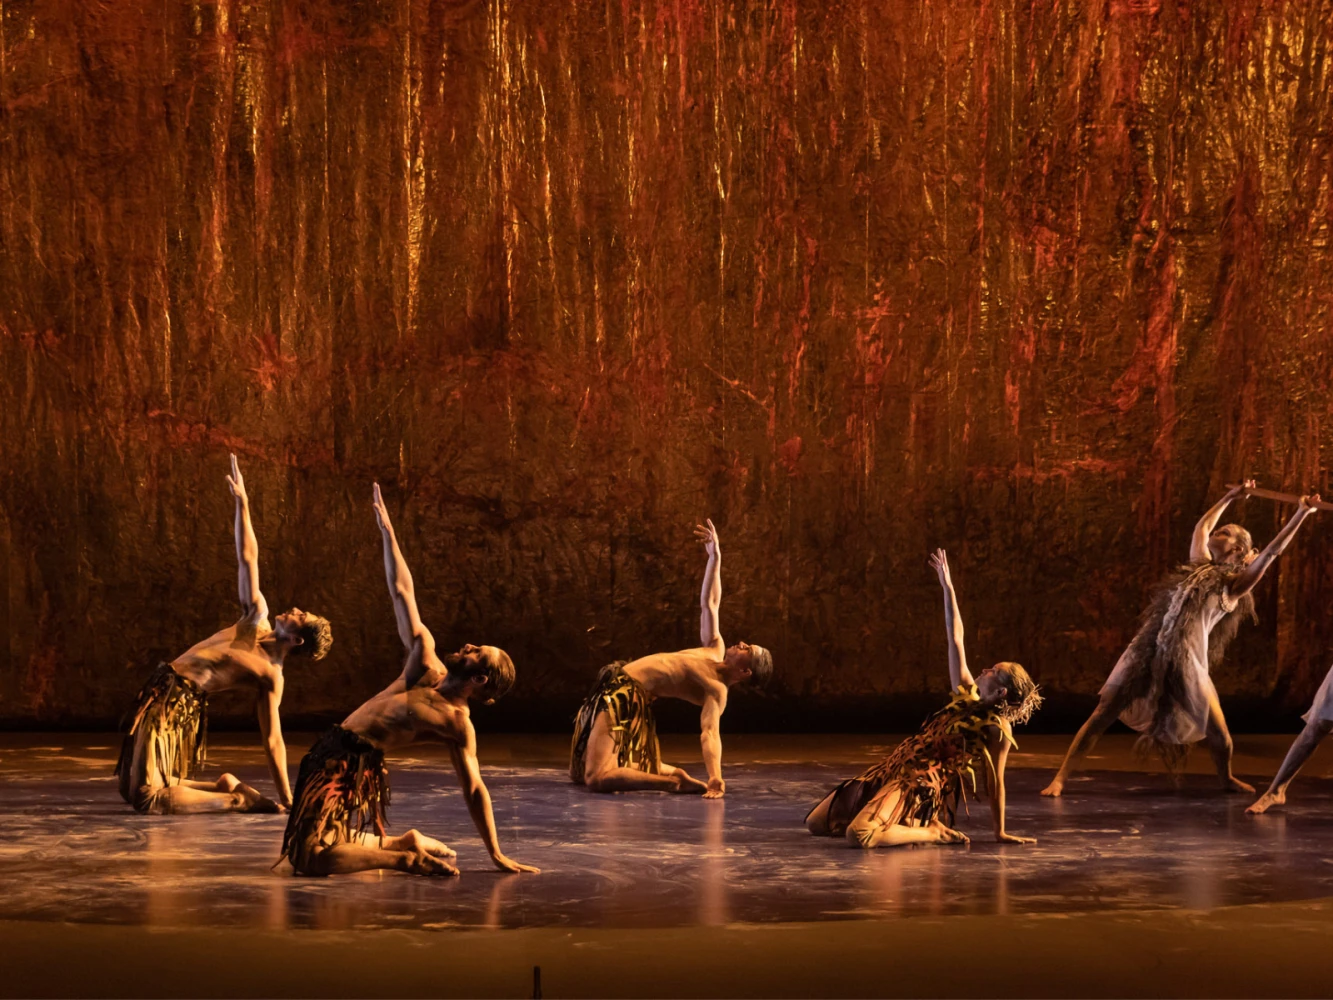 SandSong presented by Bangarra Dance Theatre: What to expect - 3